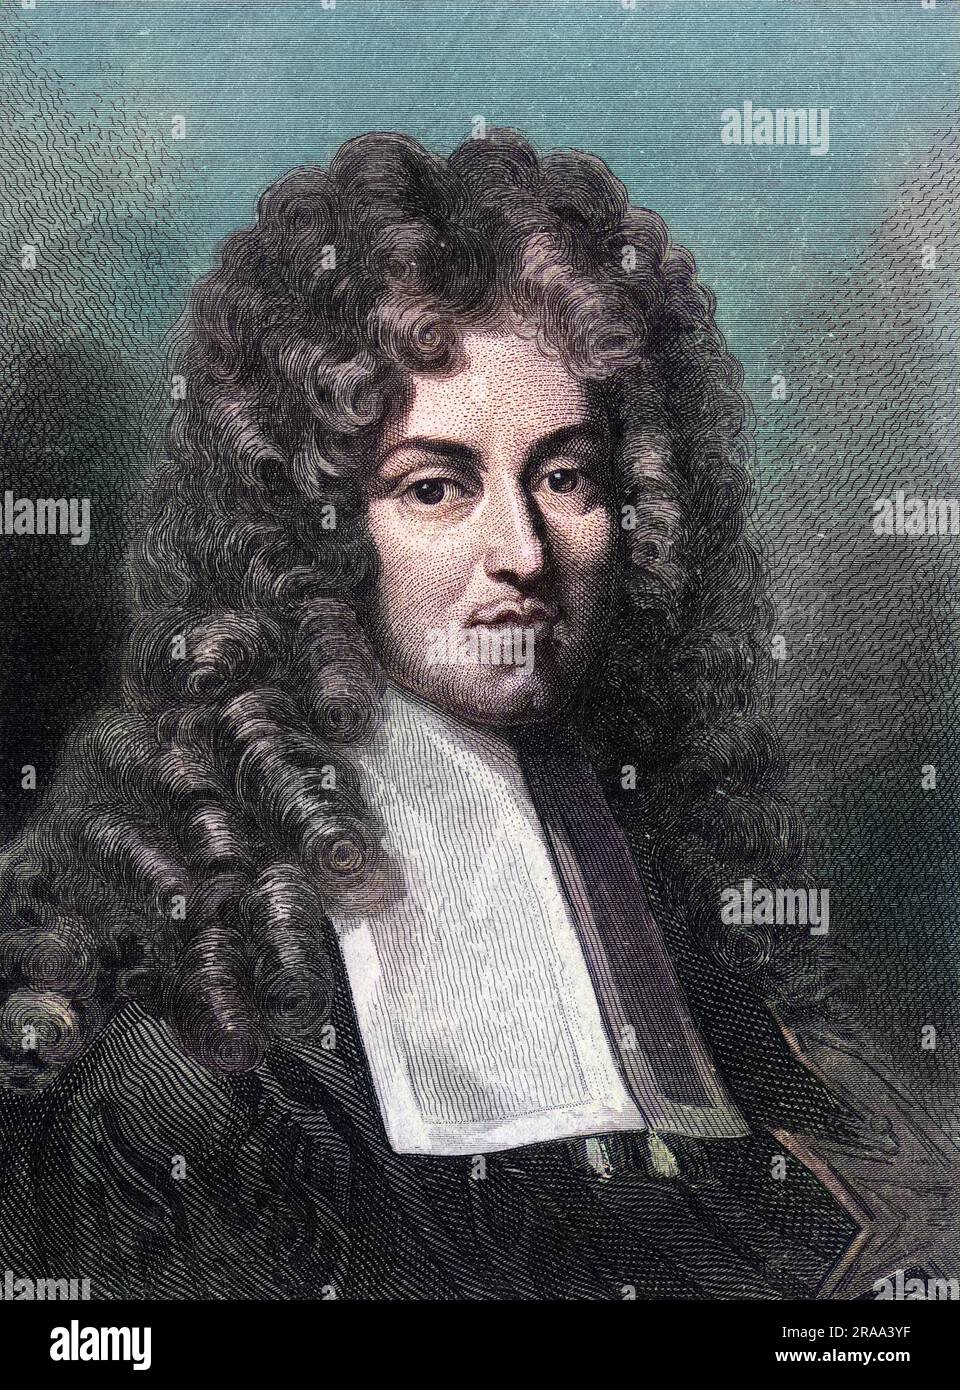 JEAN-BAPTISTE COLBERT, marquis de SEIGNELAY French statesman, son of the minister Colbert.     Date: 1651 - 1690 Stock Photo